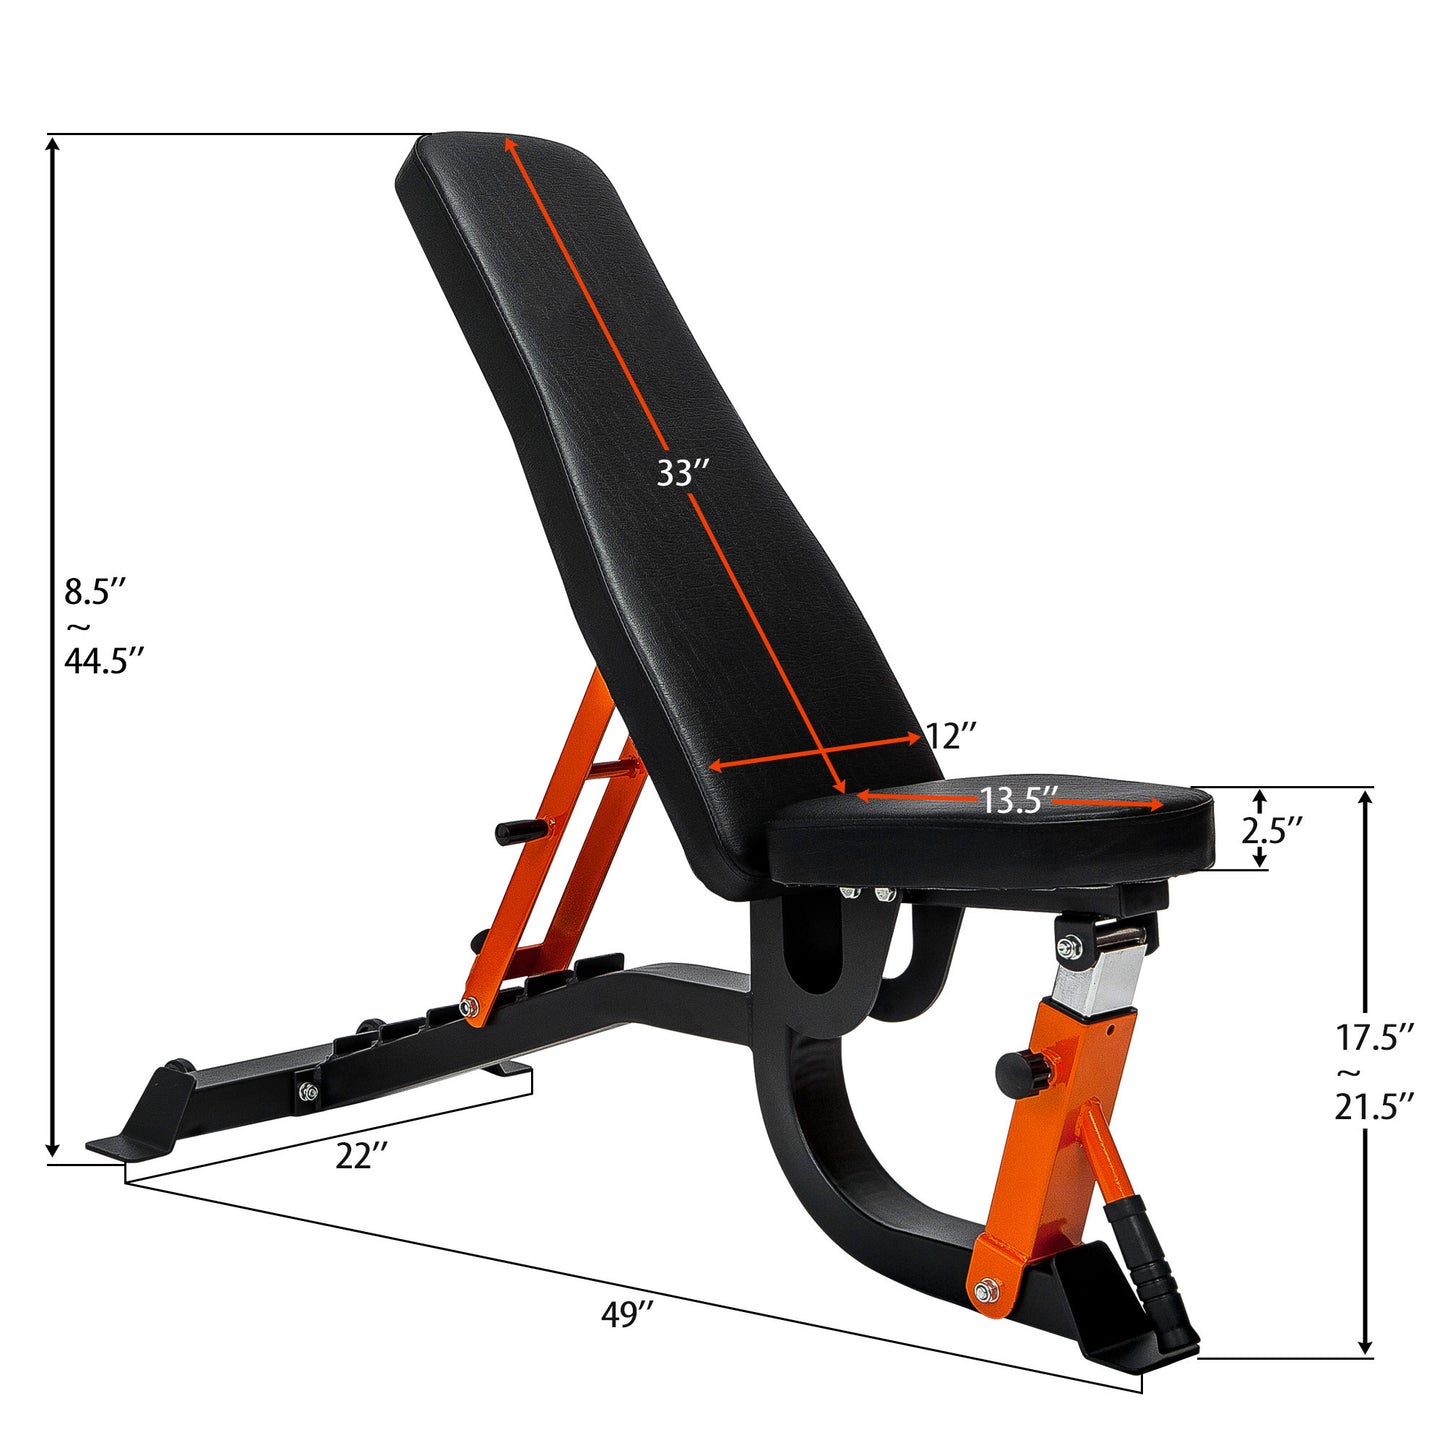 Adjustable Weight Bench - 6 Positions